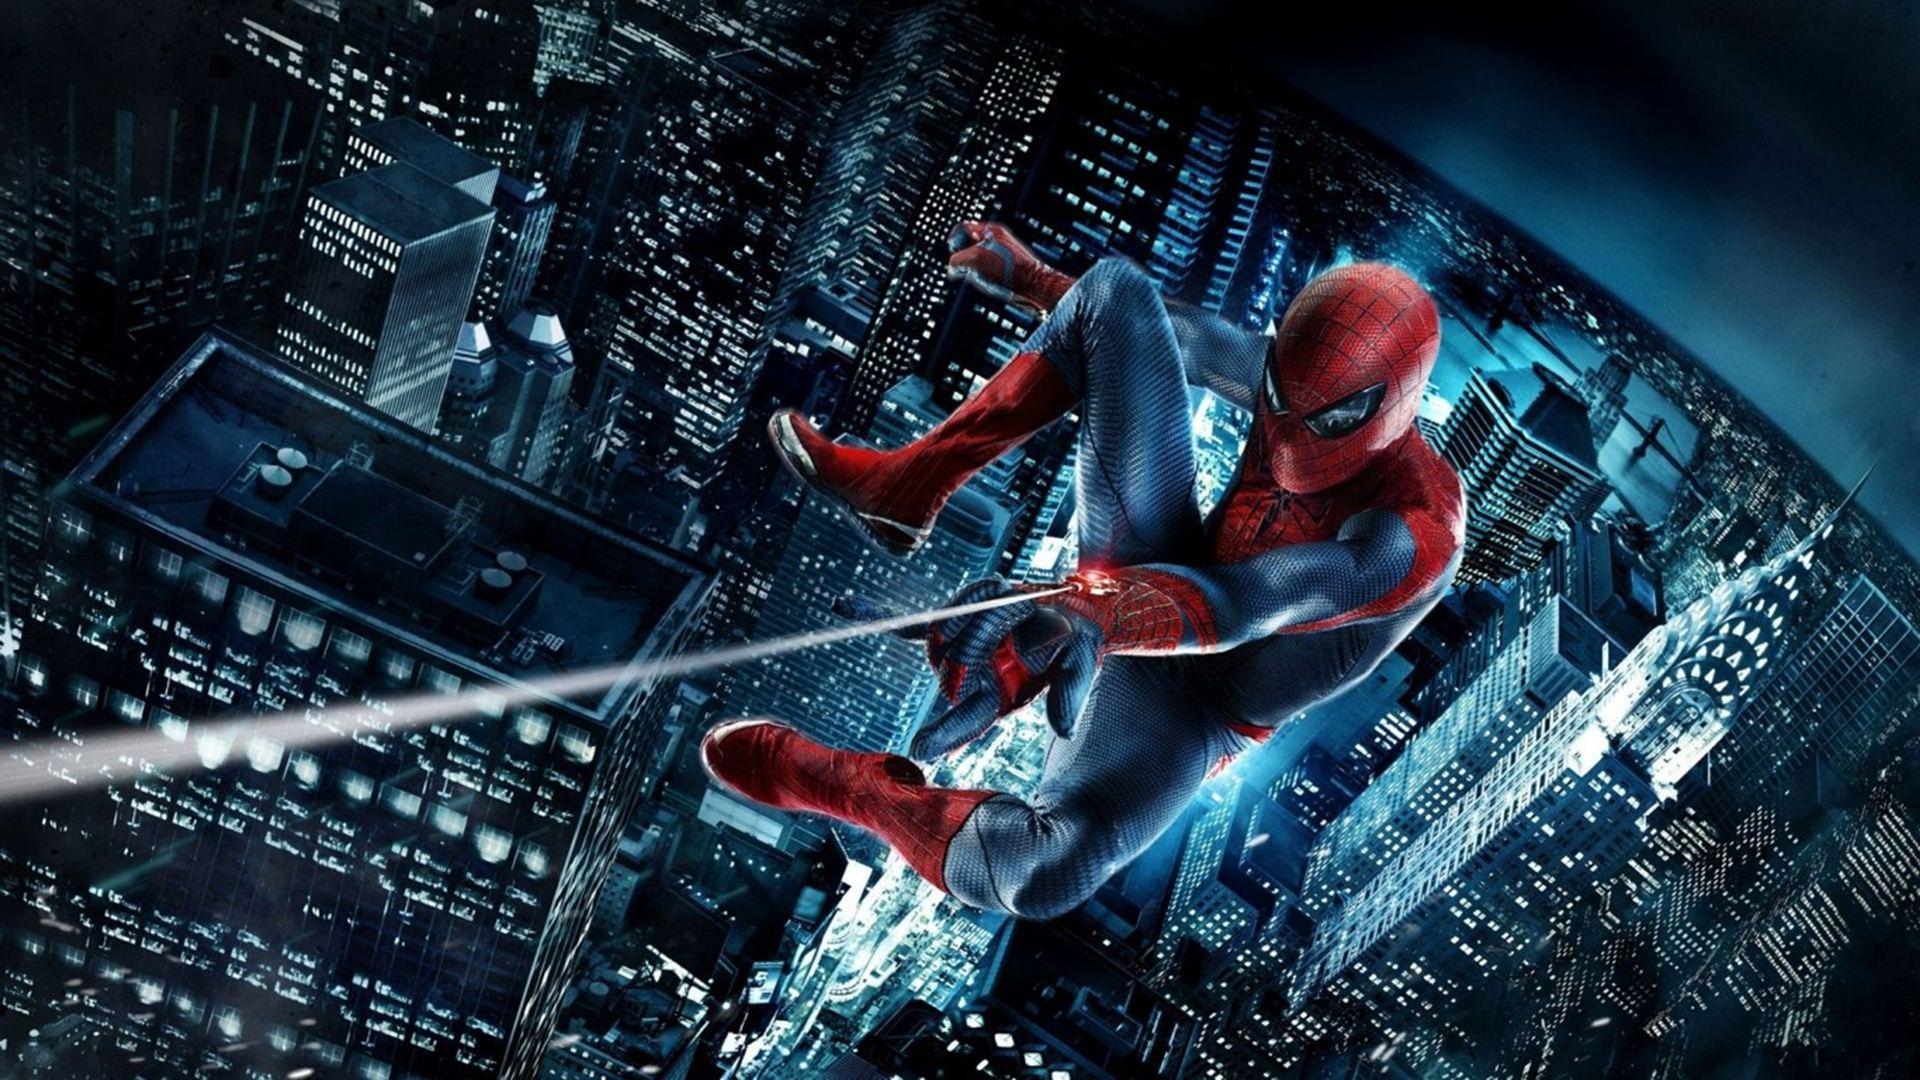 The Amazing Spider-Man Wallpapers - Top Free The Amazing Spider-Man